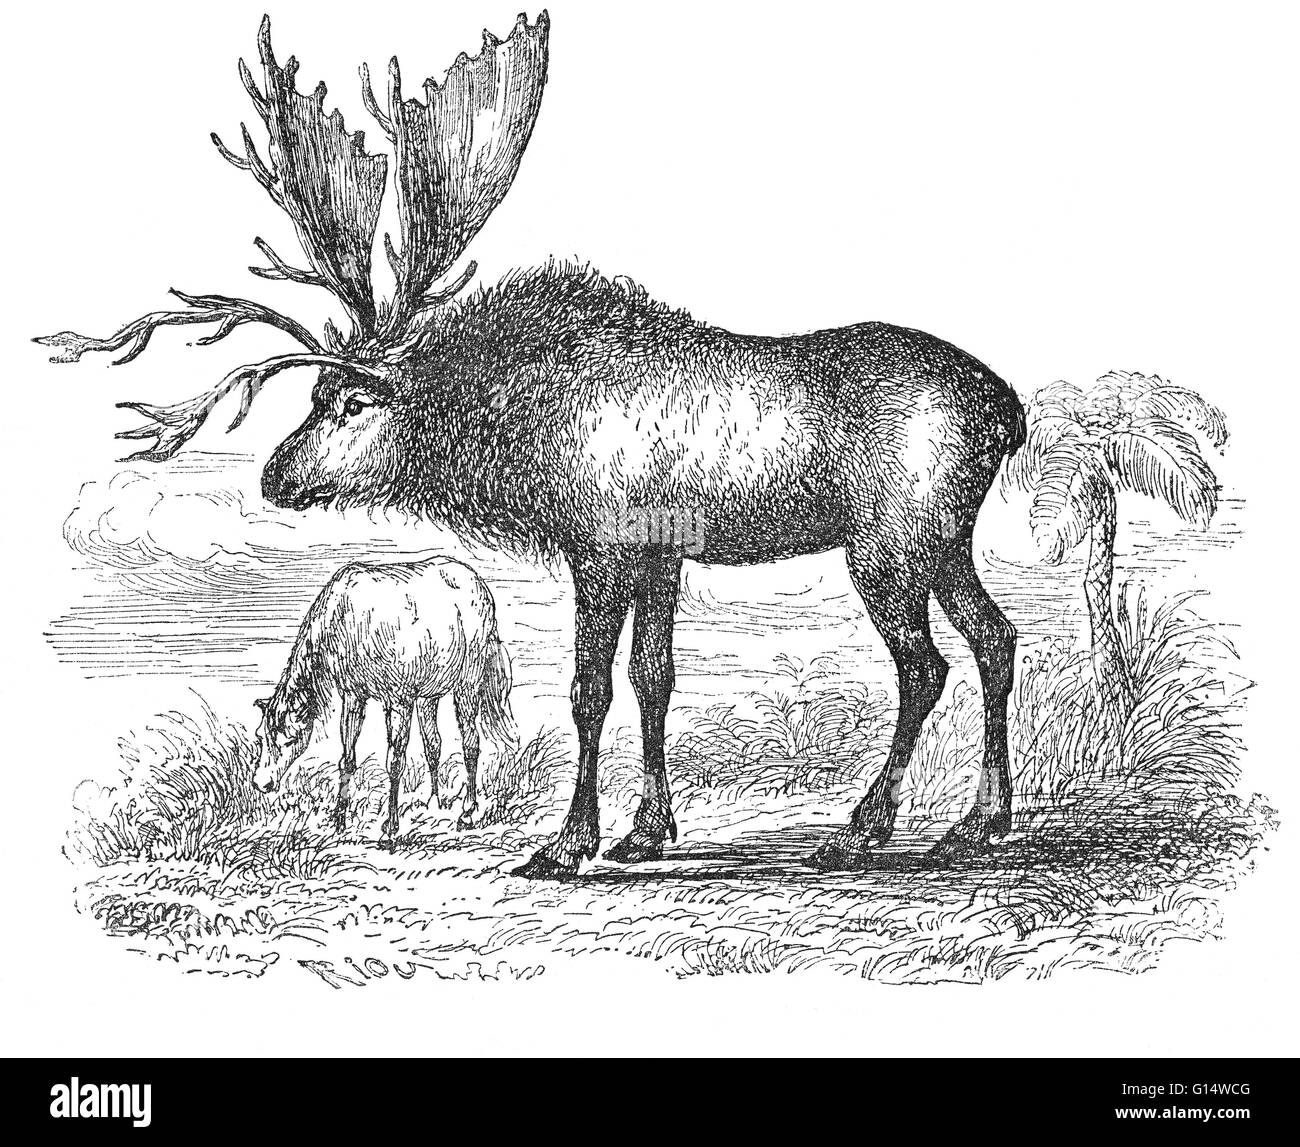 Sivatherium, reconstructed from only a skull fossil, from Louis Figuier's The World Before the Deluge, 1867 American edition.  Once thought to be a gigantic deer, it is now grouped with the giraffes and is known to have resembled today's okapi.  Sivatheri Stock Photo